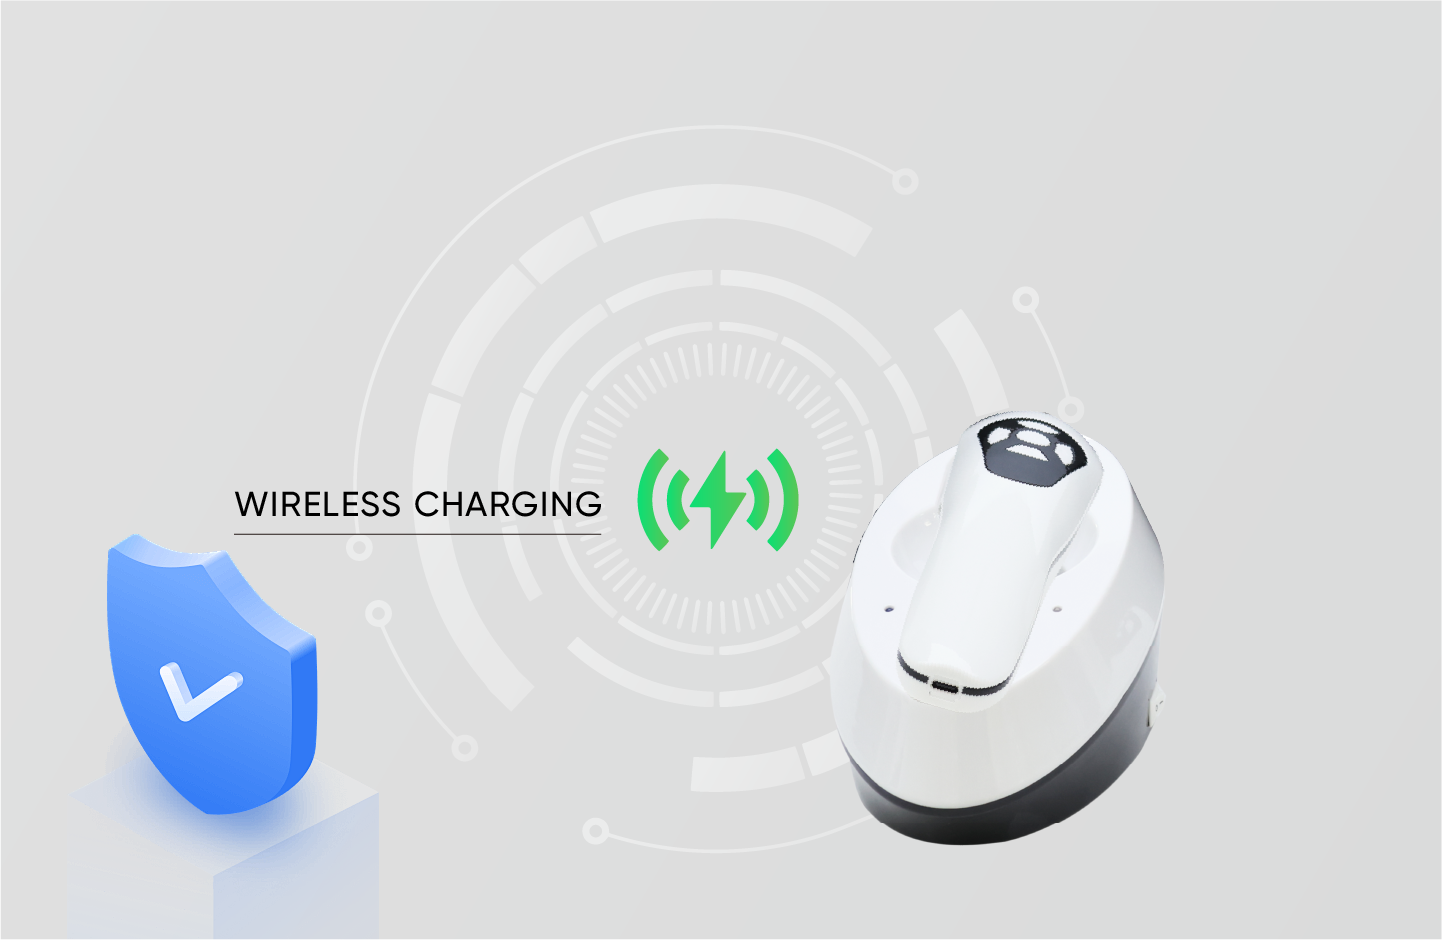 Unique 2-in-1 Detachable Design, Embracing Wireless Charging Technology